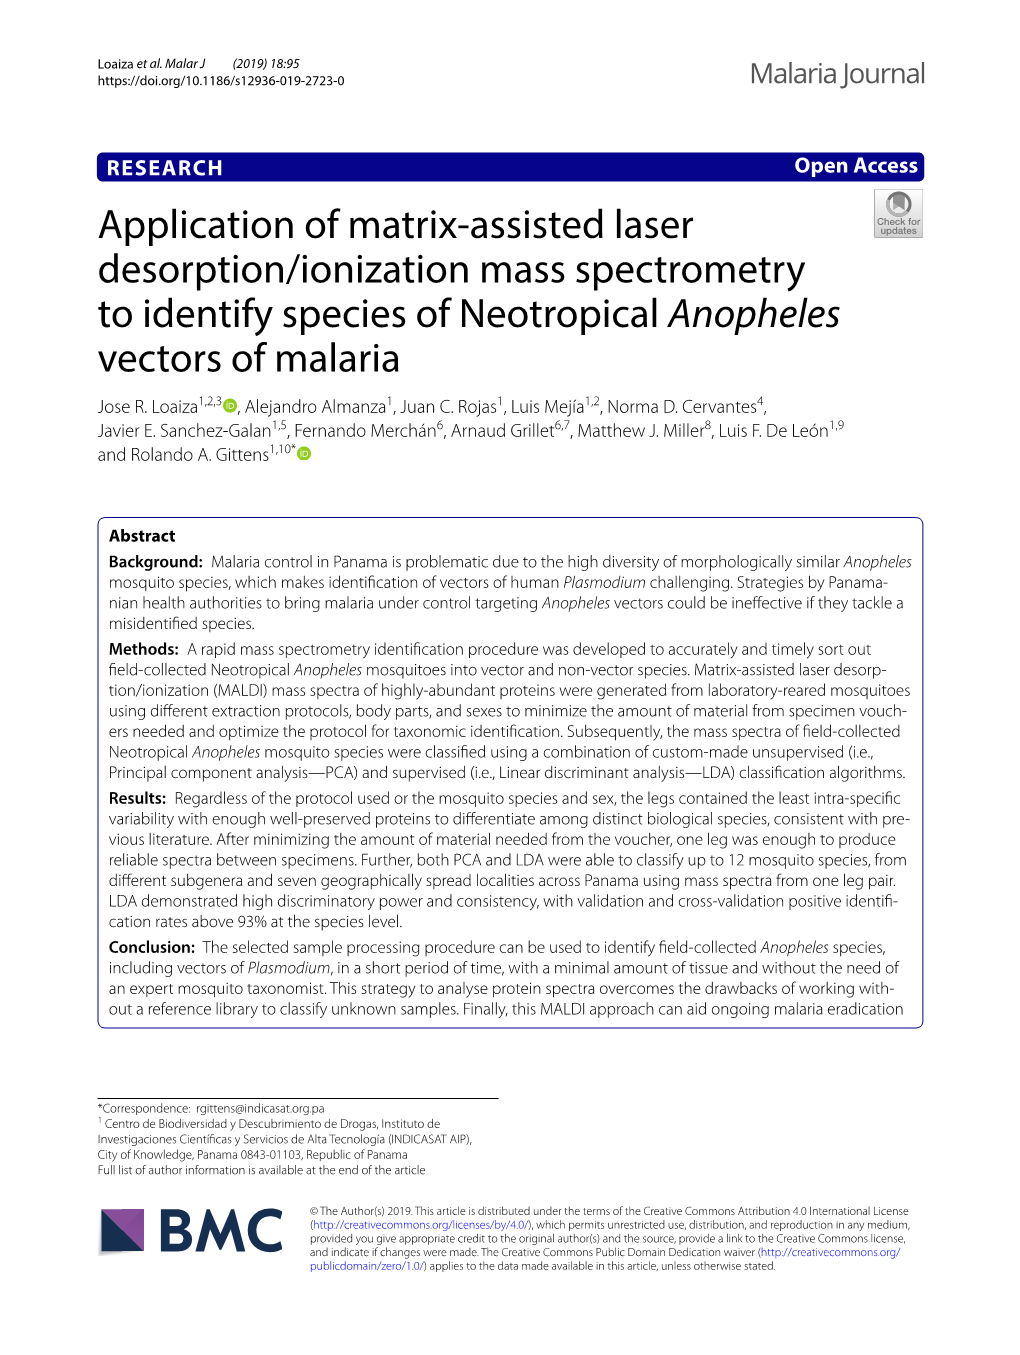 Application of Matrix-Assisted Laser Desorption/Ionization Mass Spectrometry to Identify Species of Neotropical Anopheles Vector